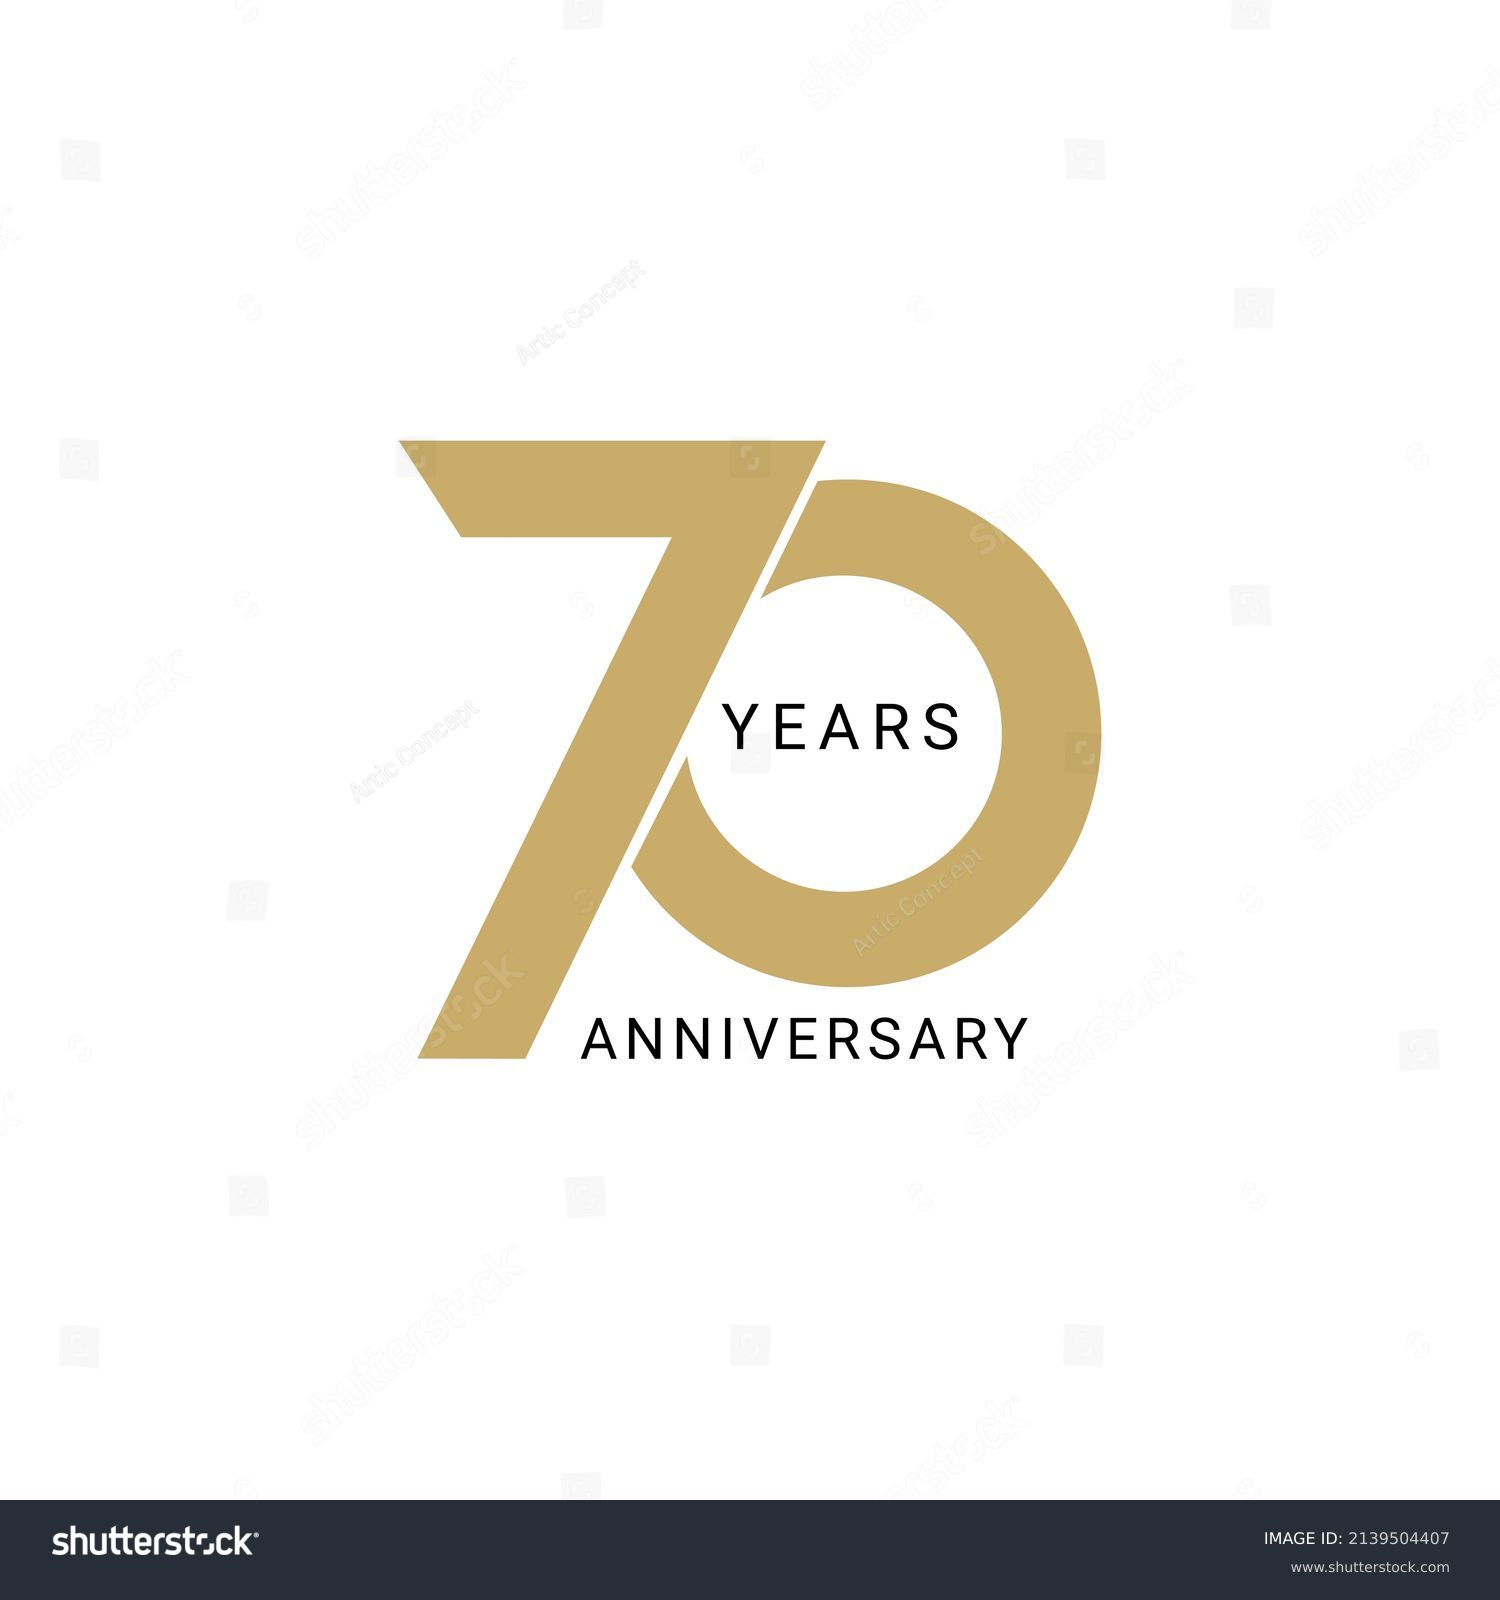 SVG of 70 Year Anniversary Logo, Golden Color, Vector Template Design element for birthday, invitation, wedding, jubilee and greeting card illustration. svg